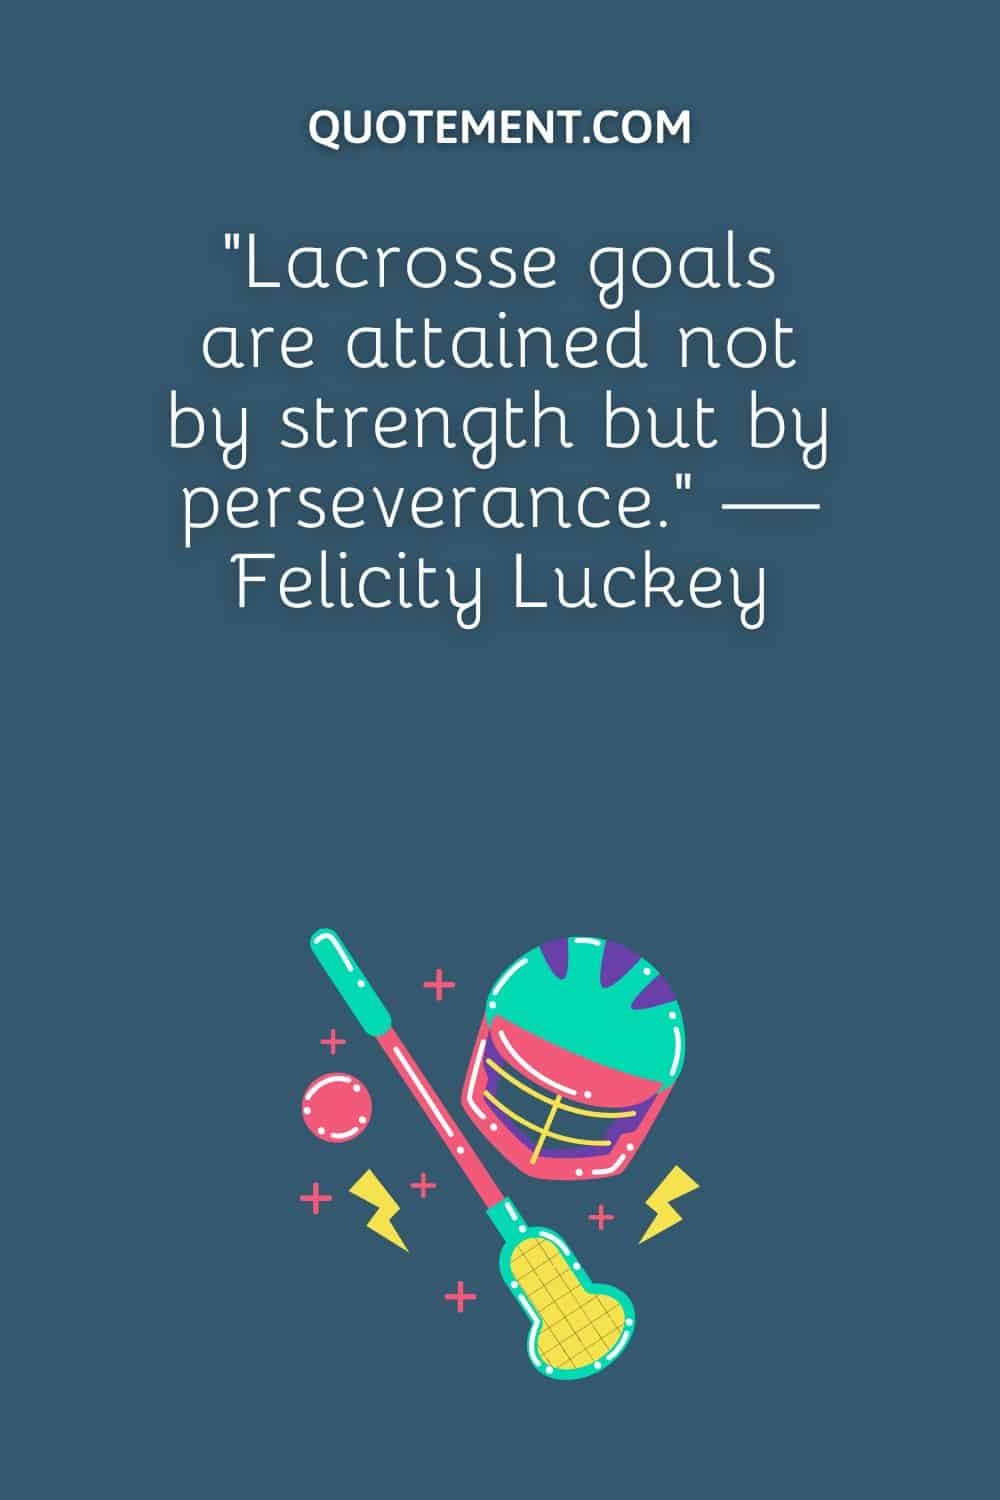 “Lacrosse goals are attained not by strength but by perseverance.” — Felicity Luckey